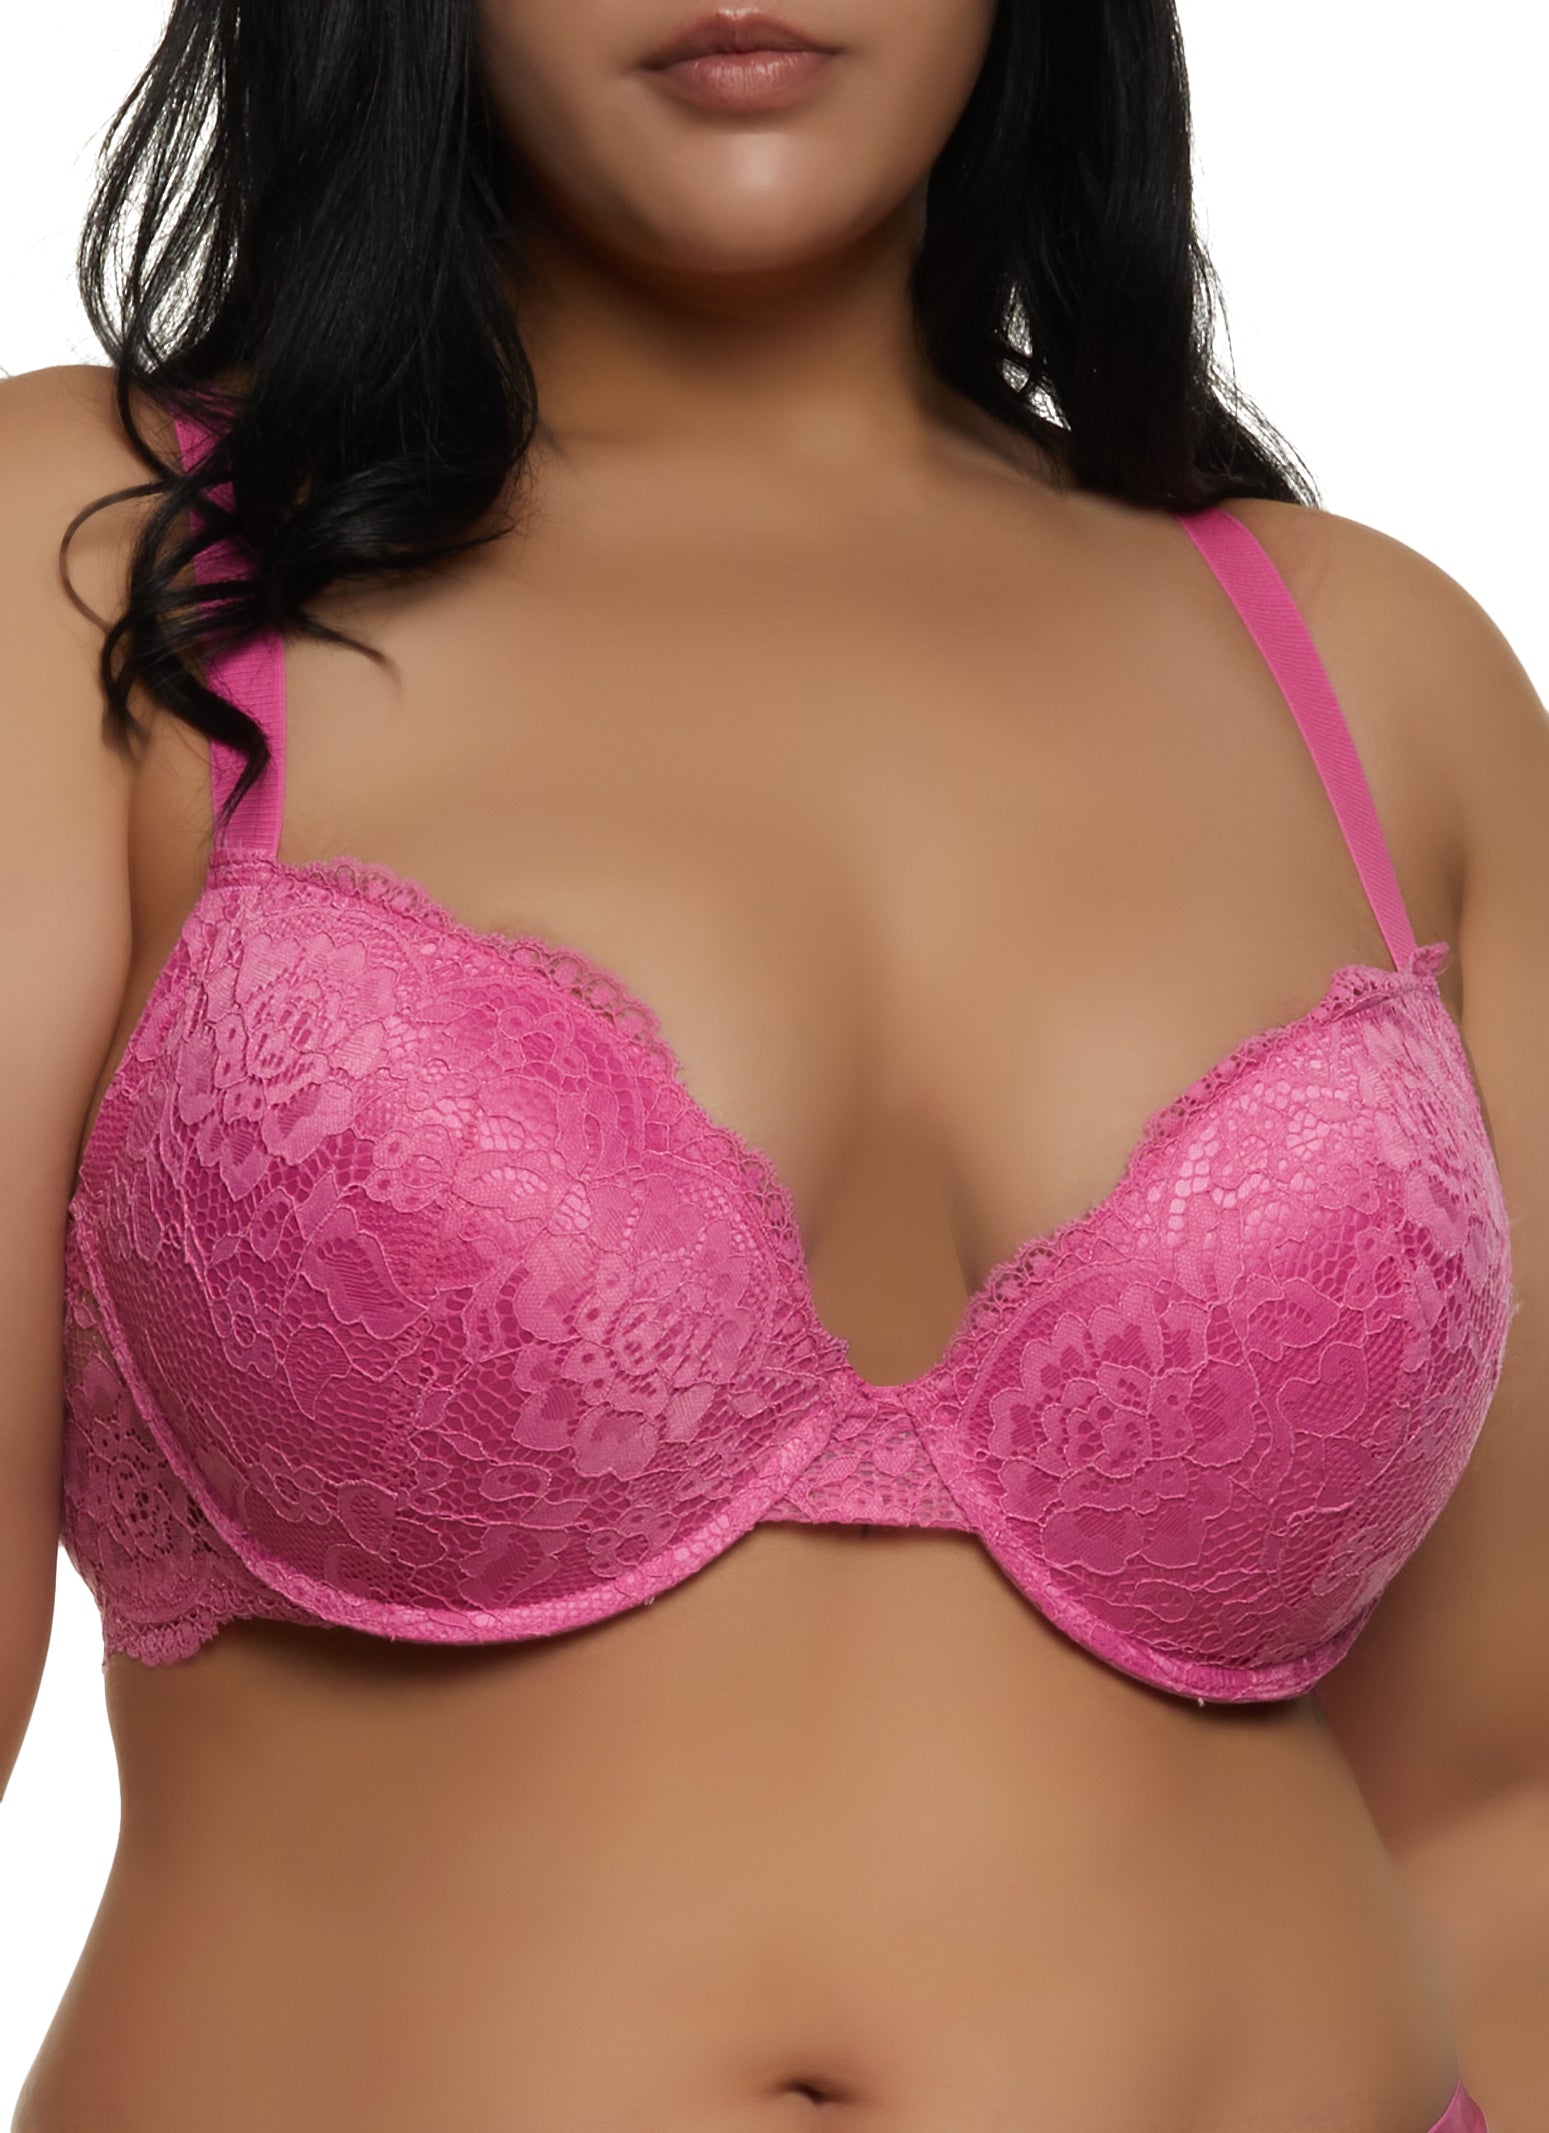 RPVATI Women's Plus Size Bralette Support Hollow Out Lace Comfortable Bra  Pink 5XL 